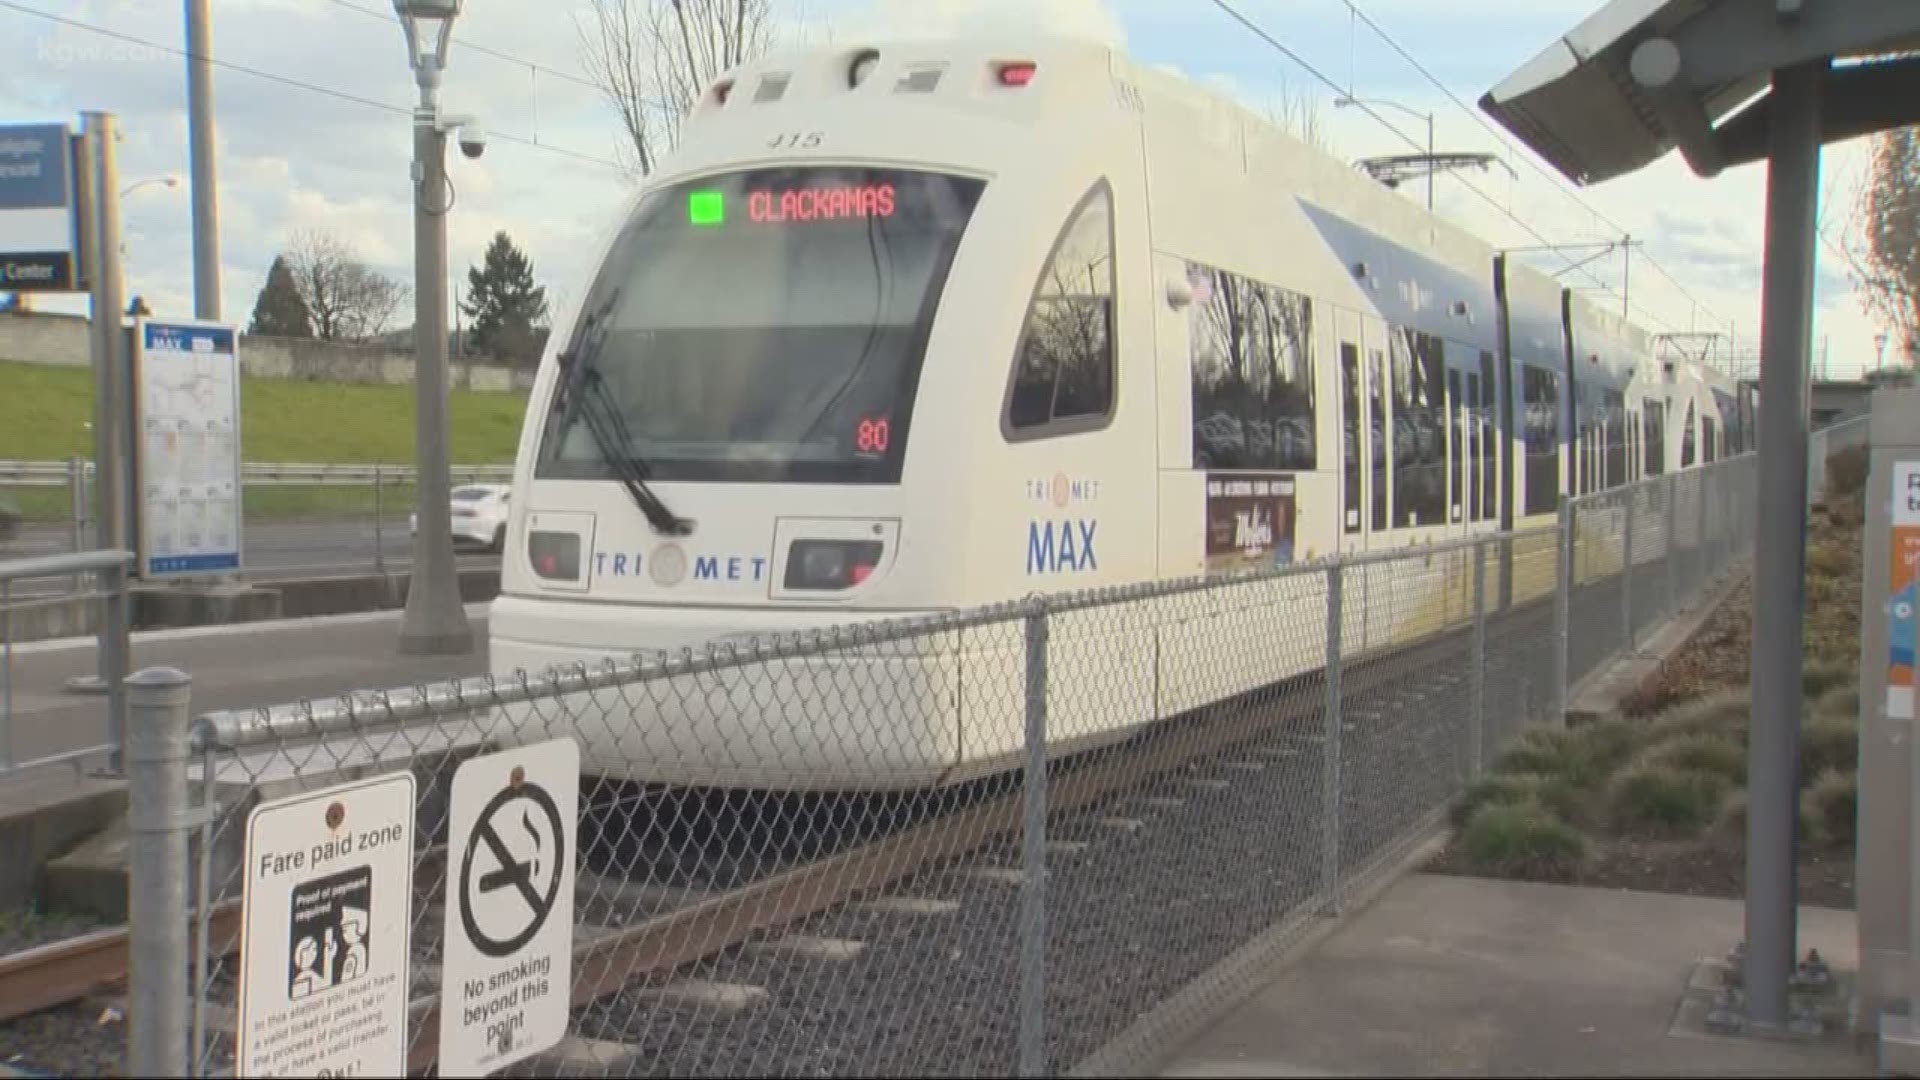 Police arrested seven teenagers after an assault on a MAX train in Southeast Portland on Tuesday afternoon. One person was hurt and a knife was shown but not used.